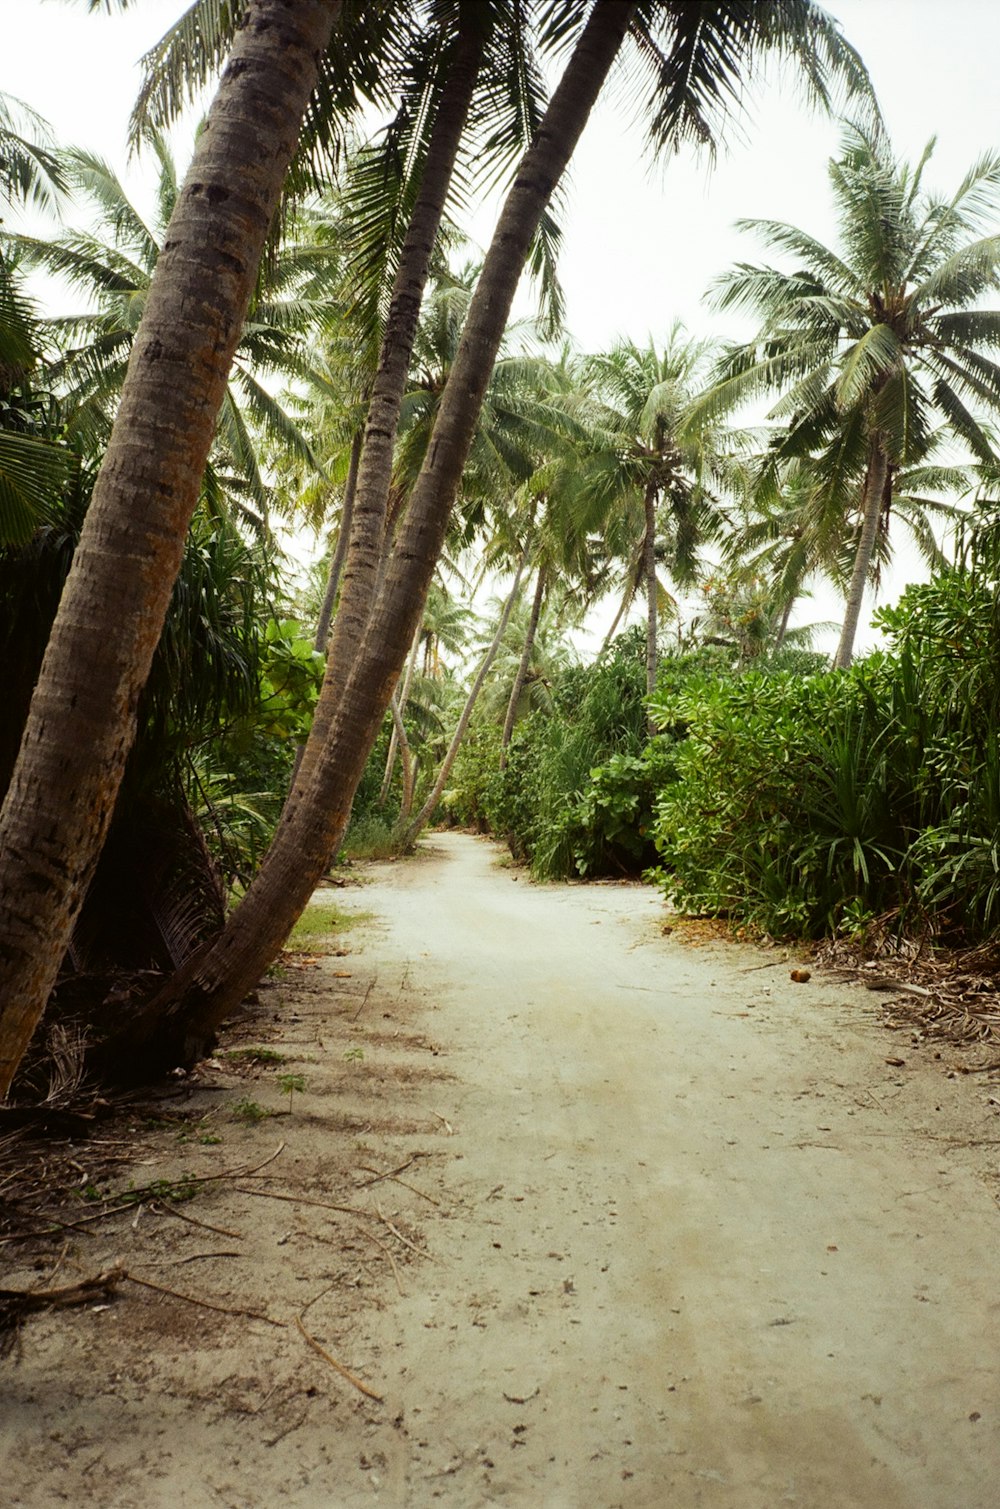 a dirt road surrounded by palm trees on a cloudy day